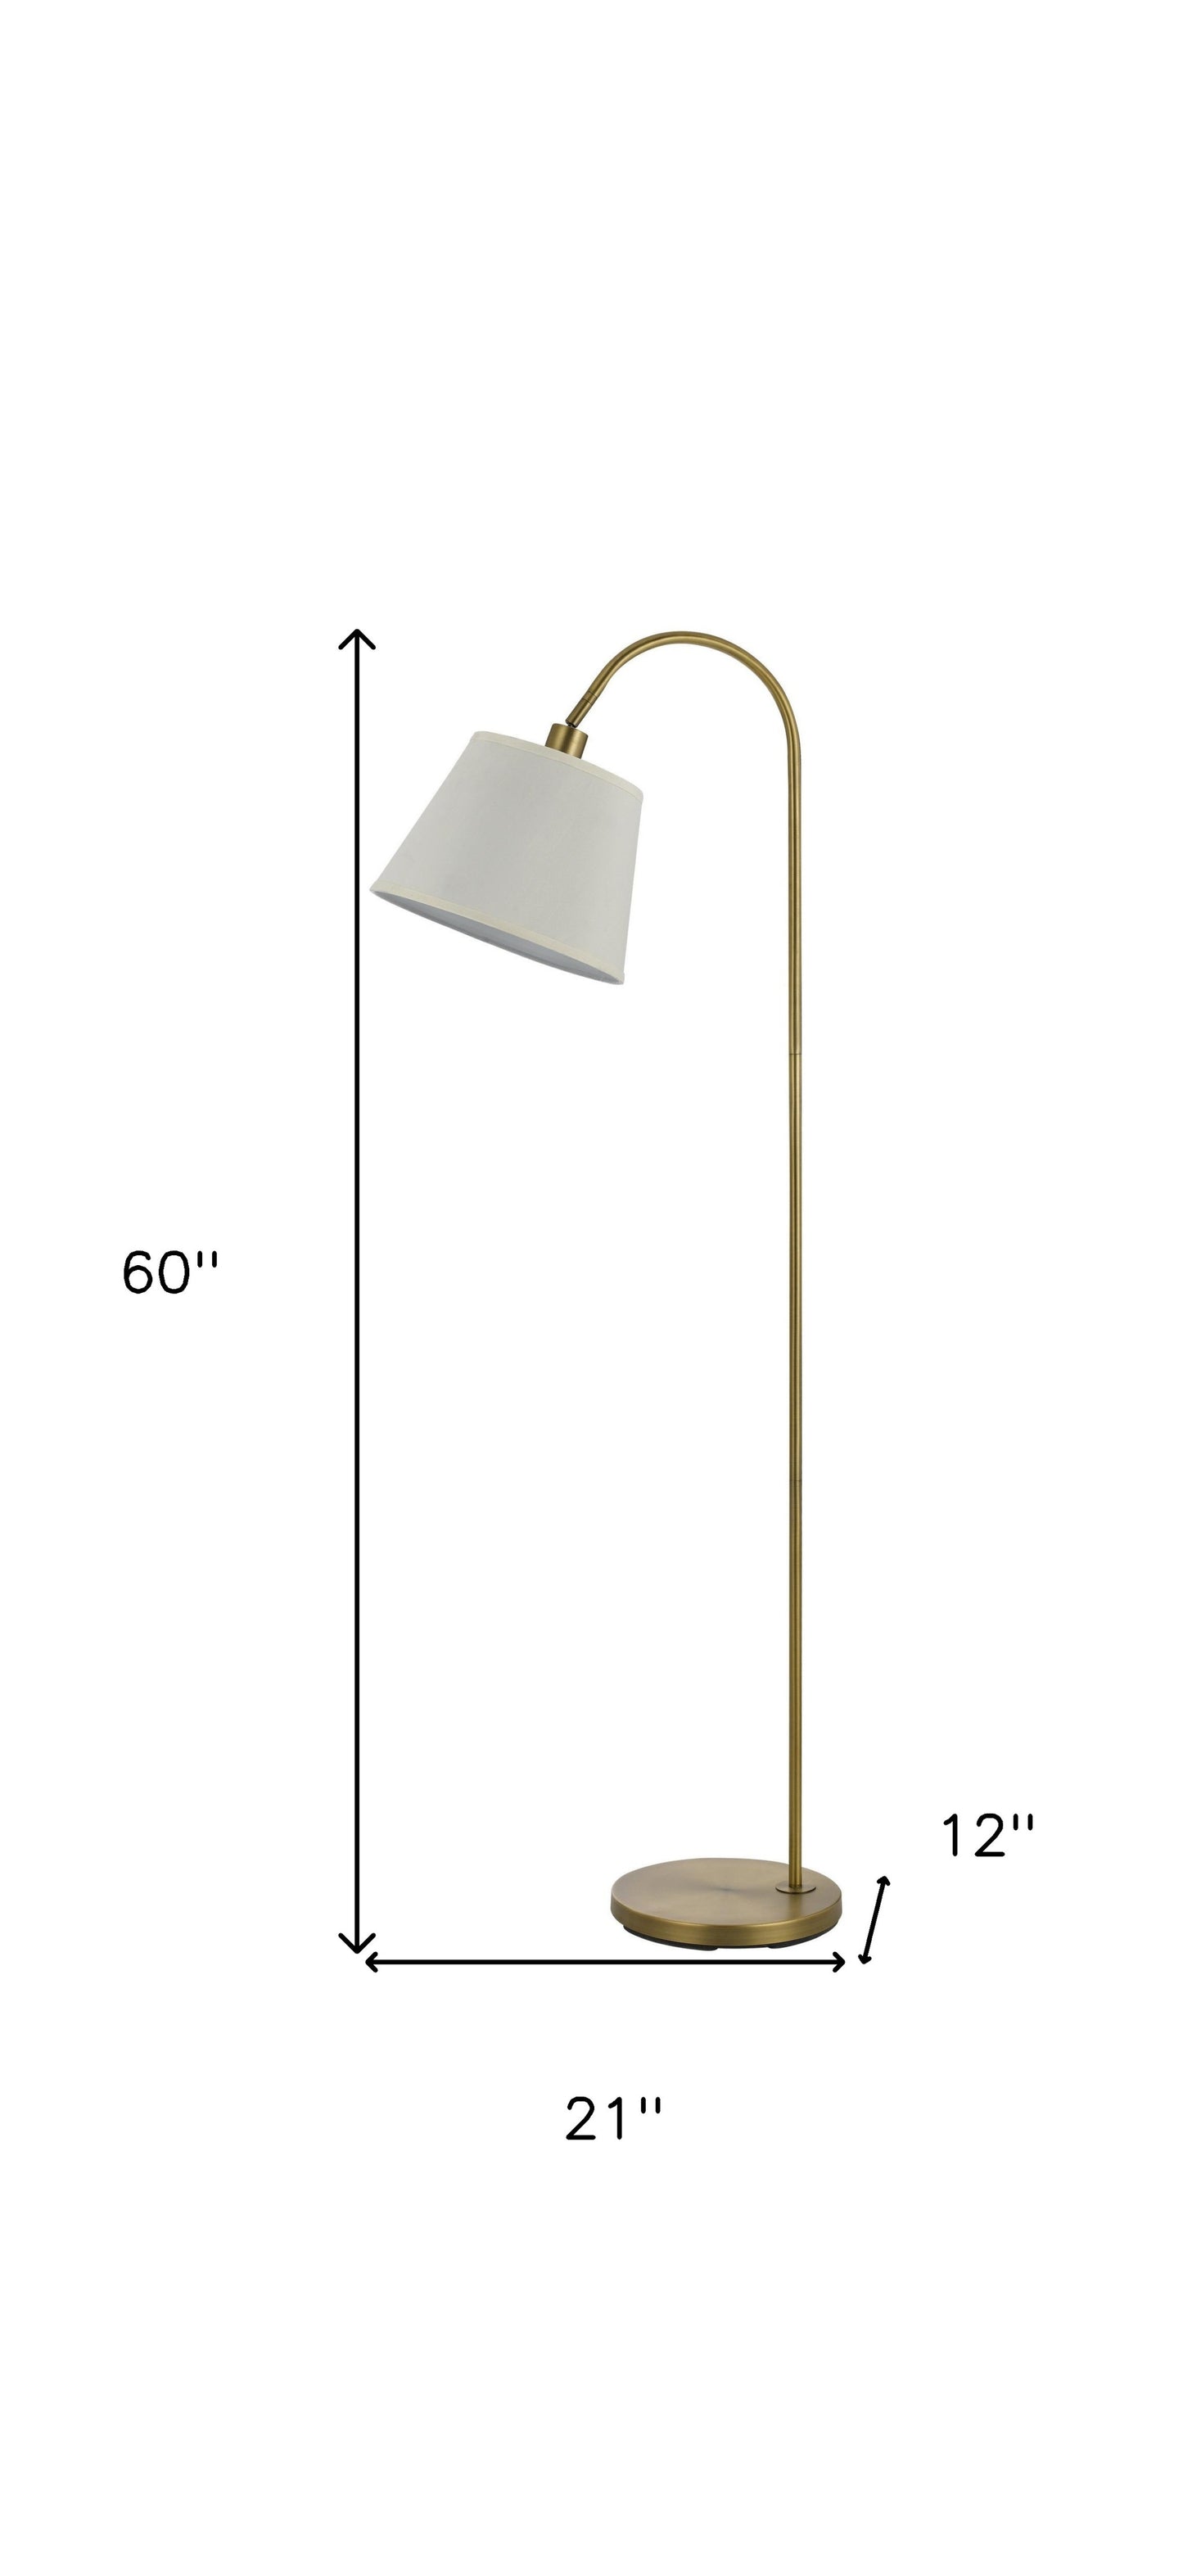 60" Bronze Traditional Shaped Floor Lamp With White Empire Shade